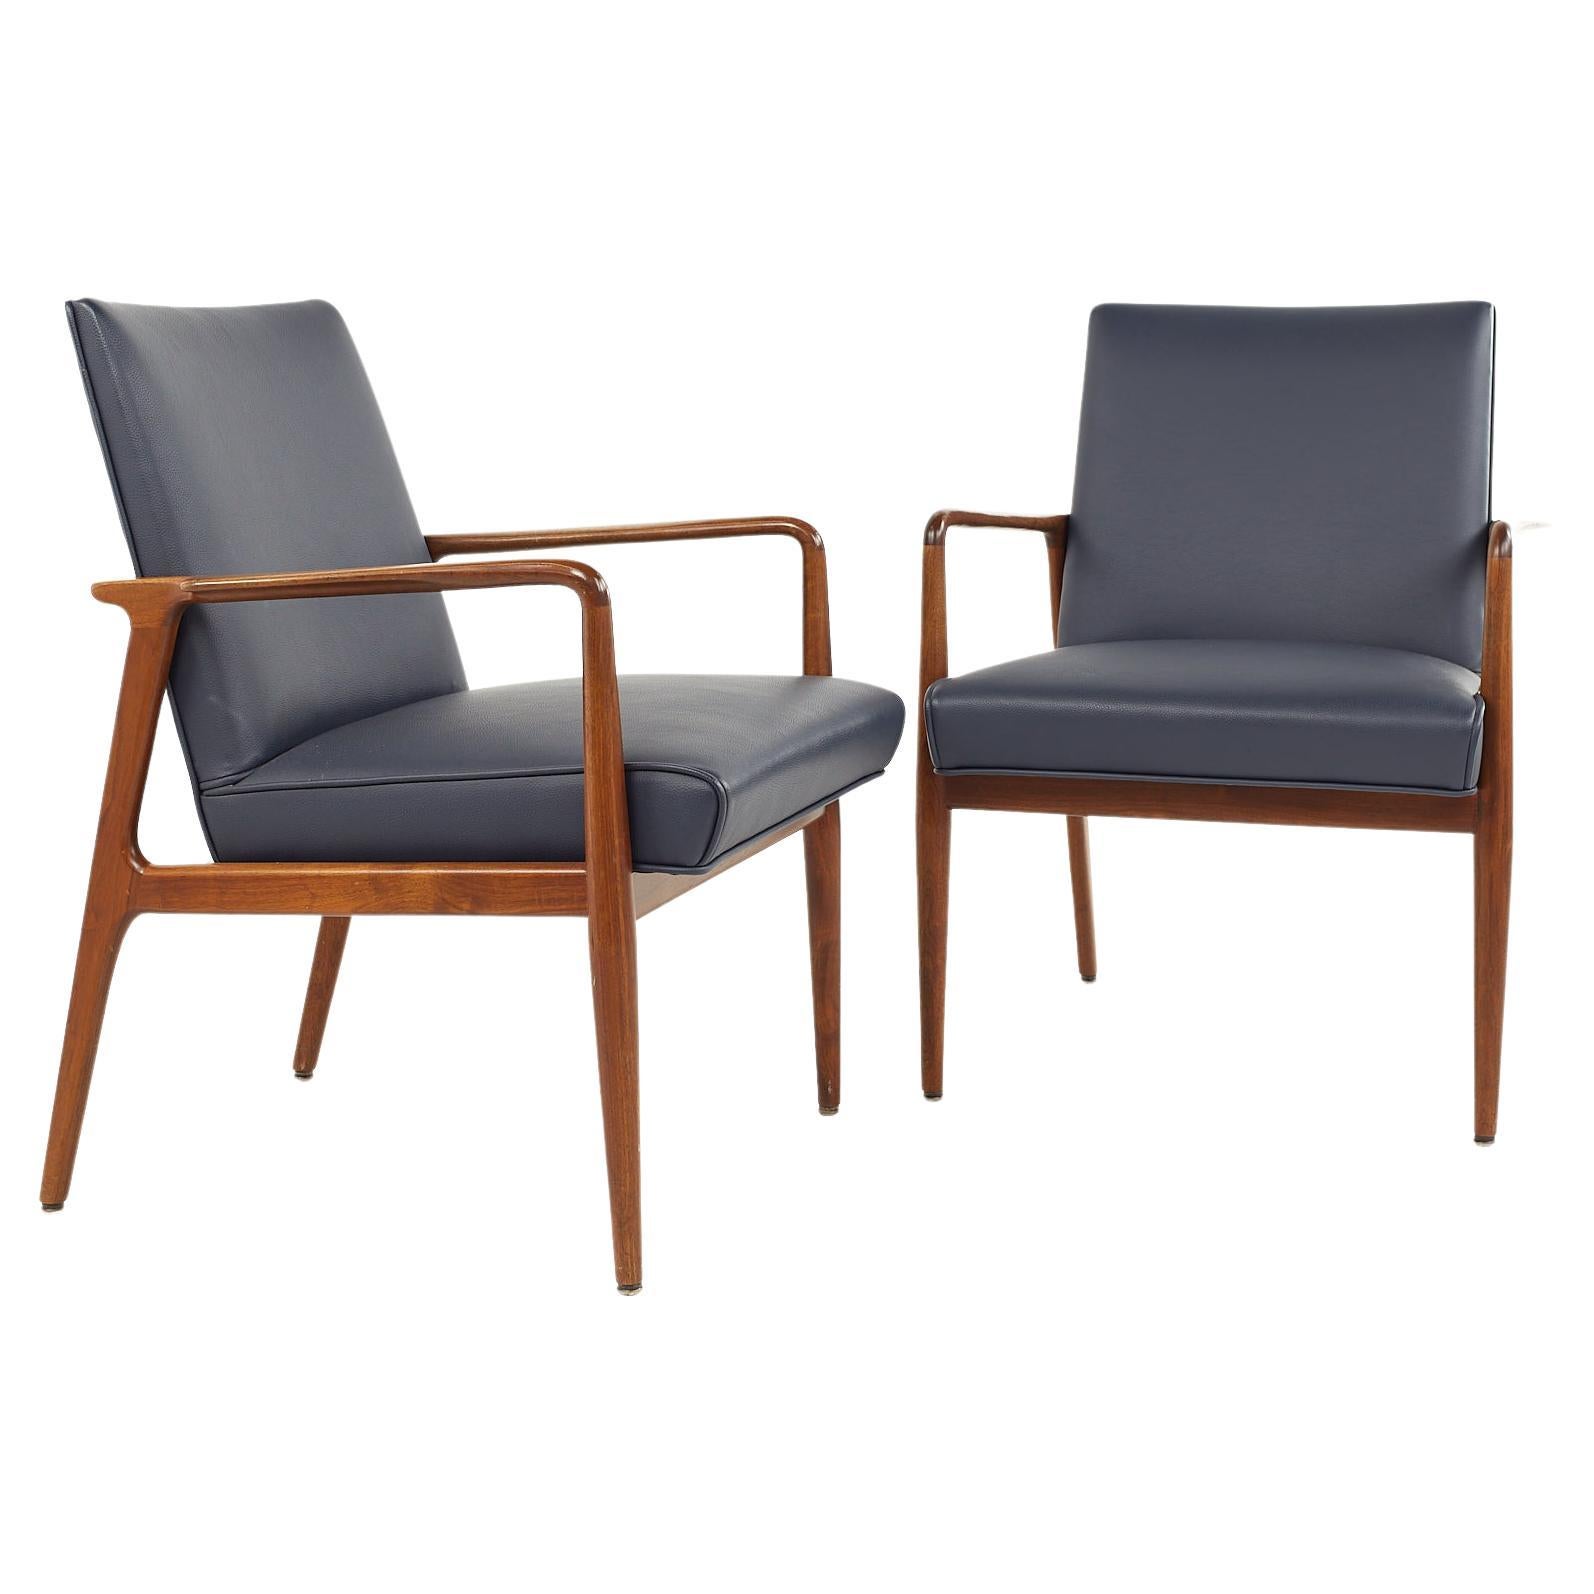 Sold - Stow Davis Mid Century Lounge Chair, A Pair